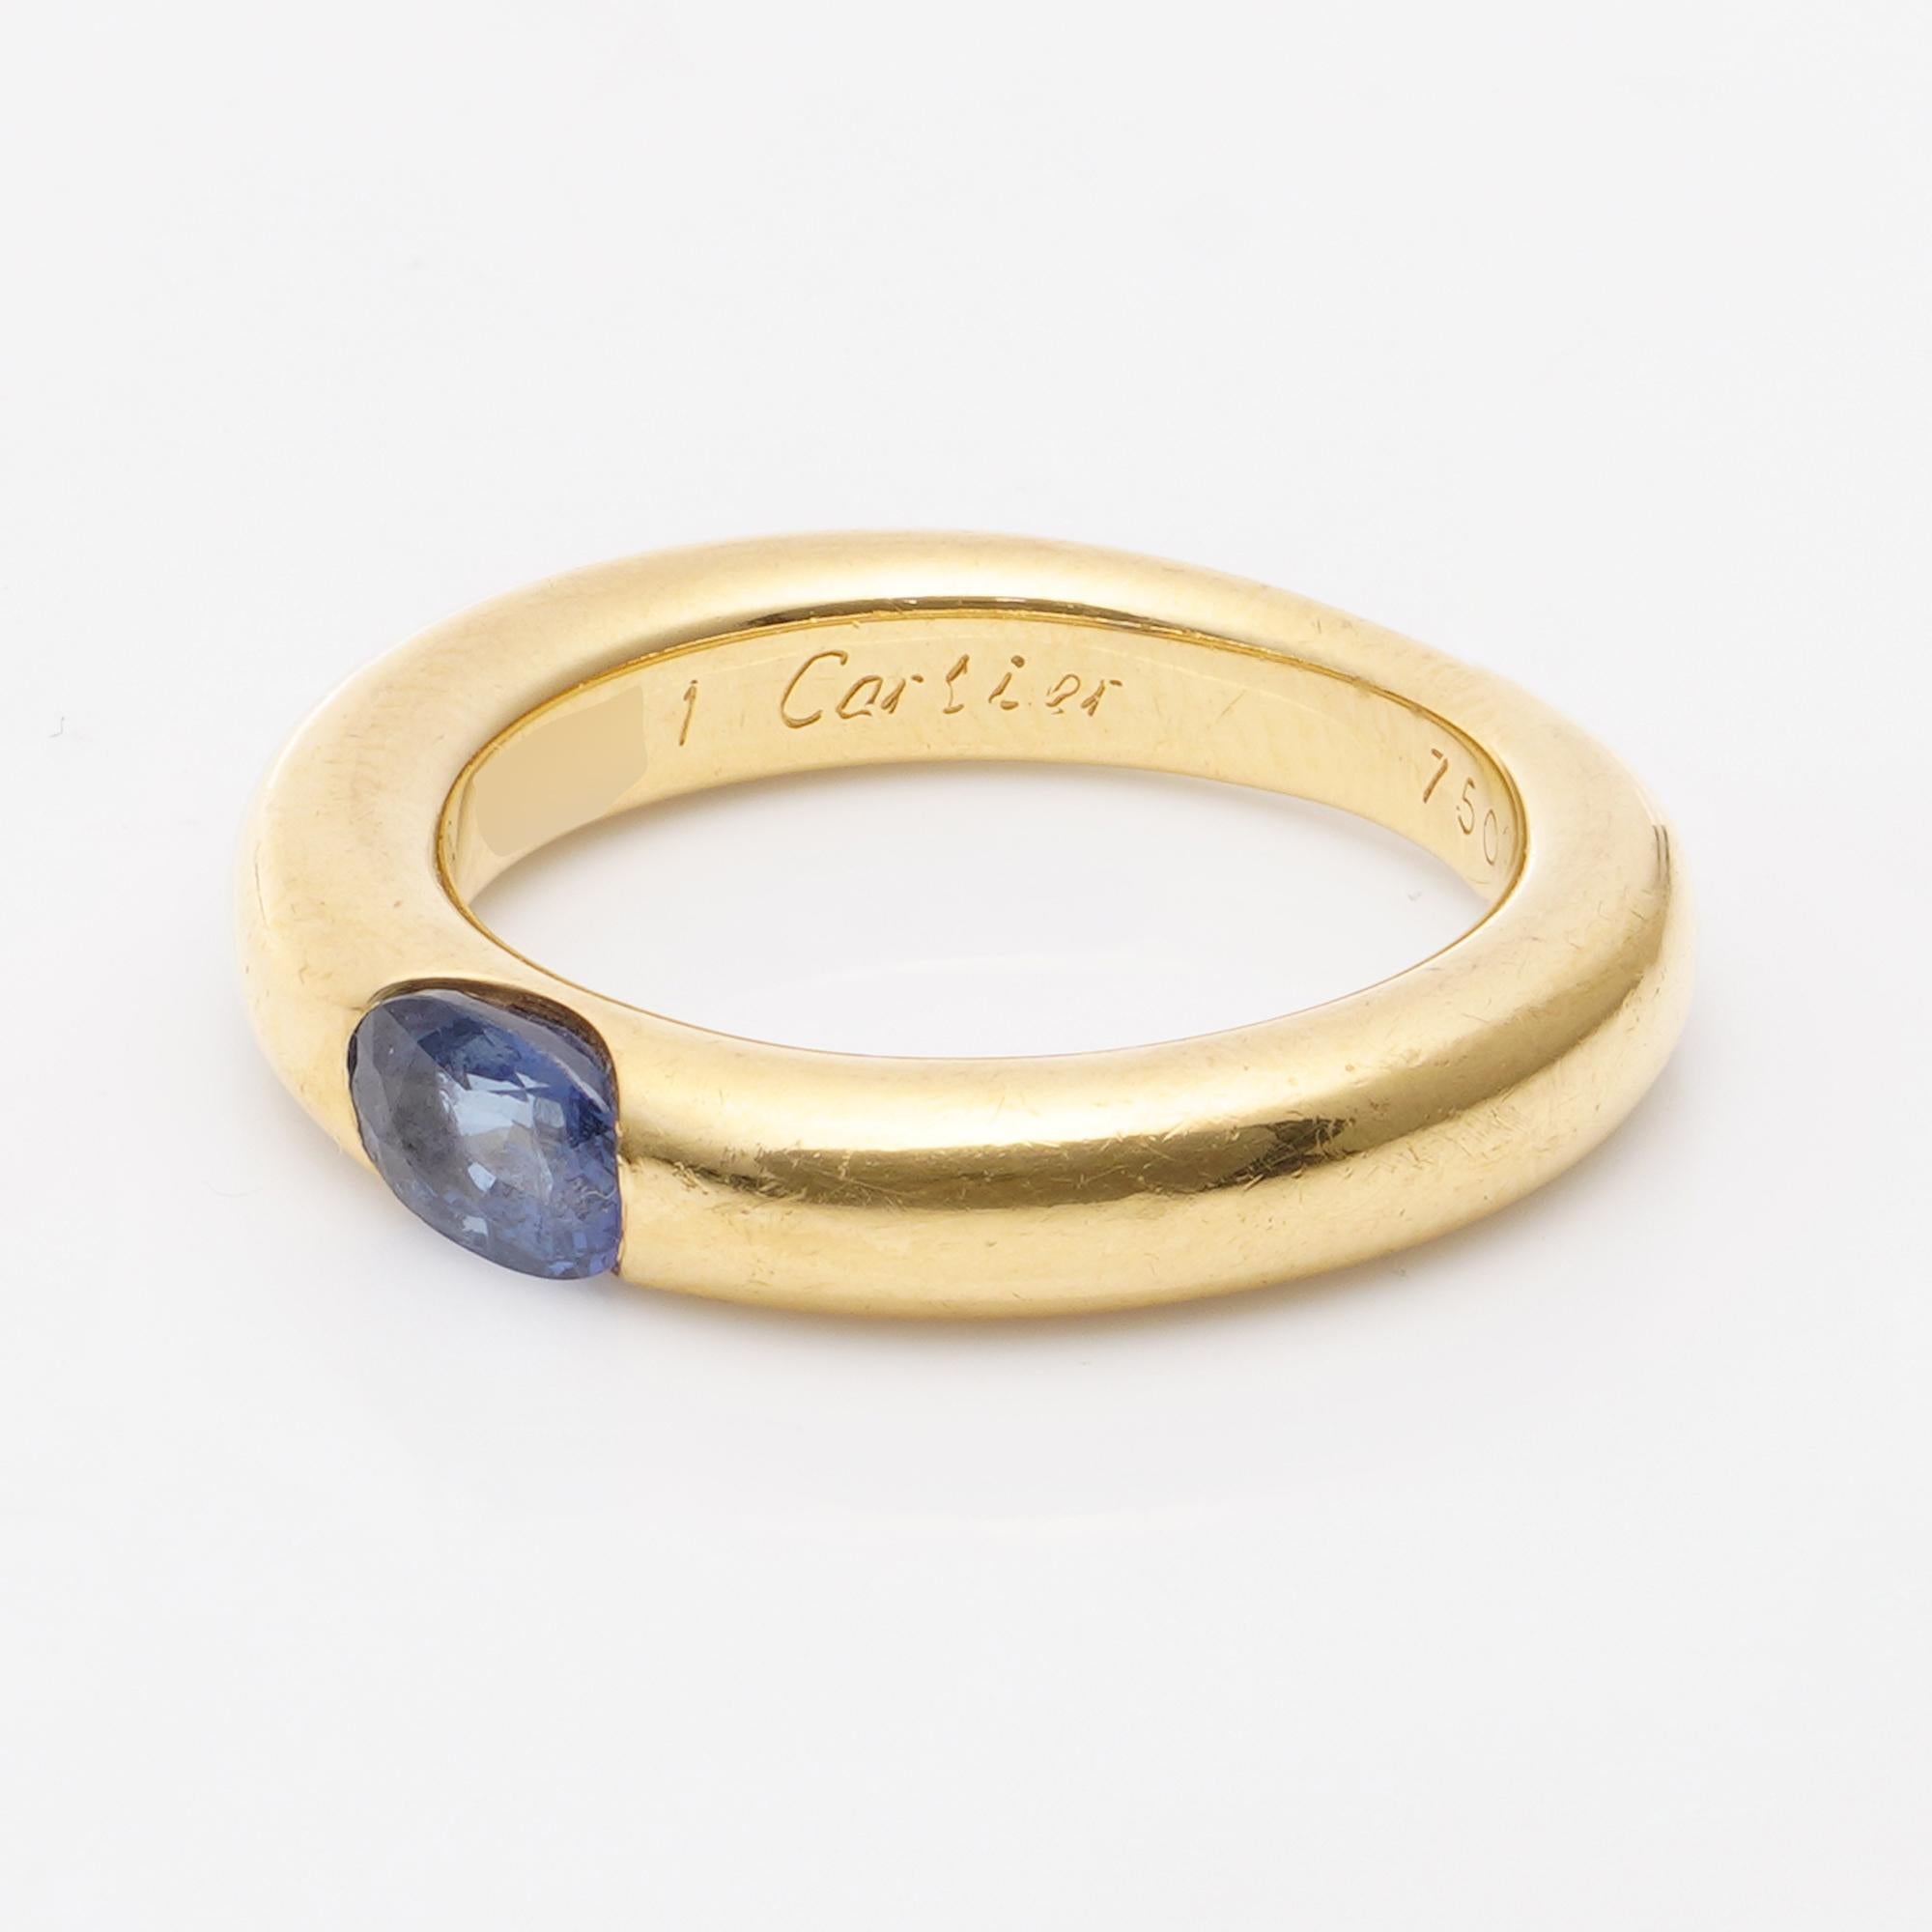 Cartier Ellipse Collection 18k Gold Band Ring with 0.40 cts. of Sapphire  For Sale 1